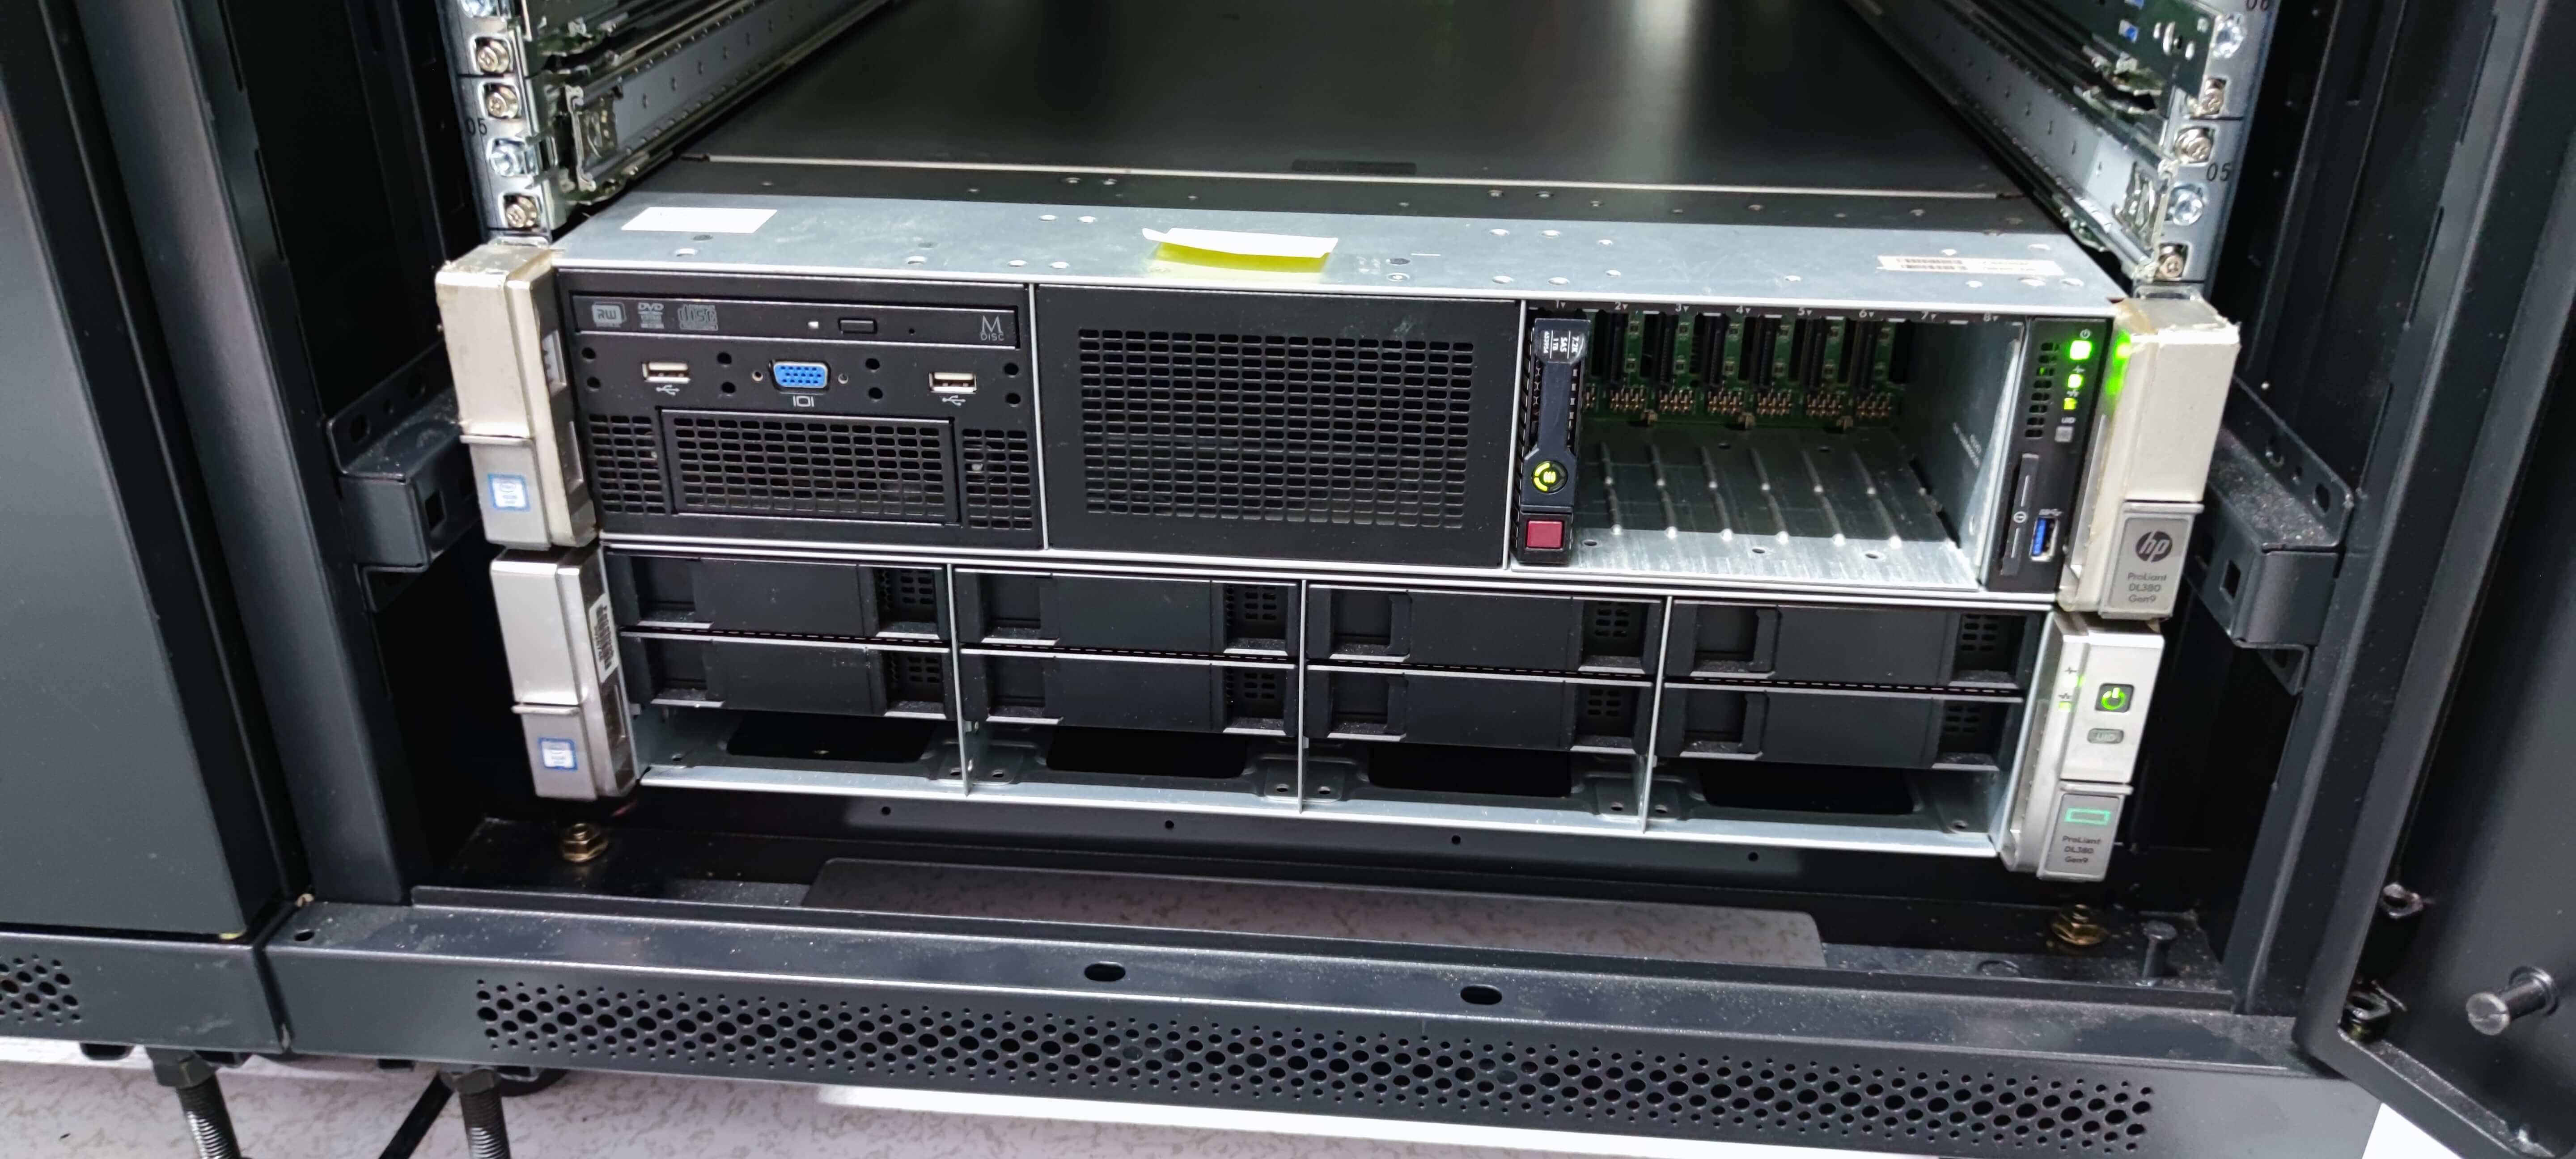 One of our hosts puts their servers in a data center!